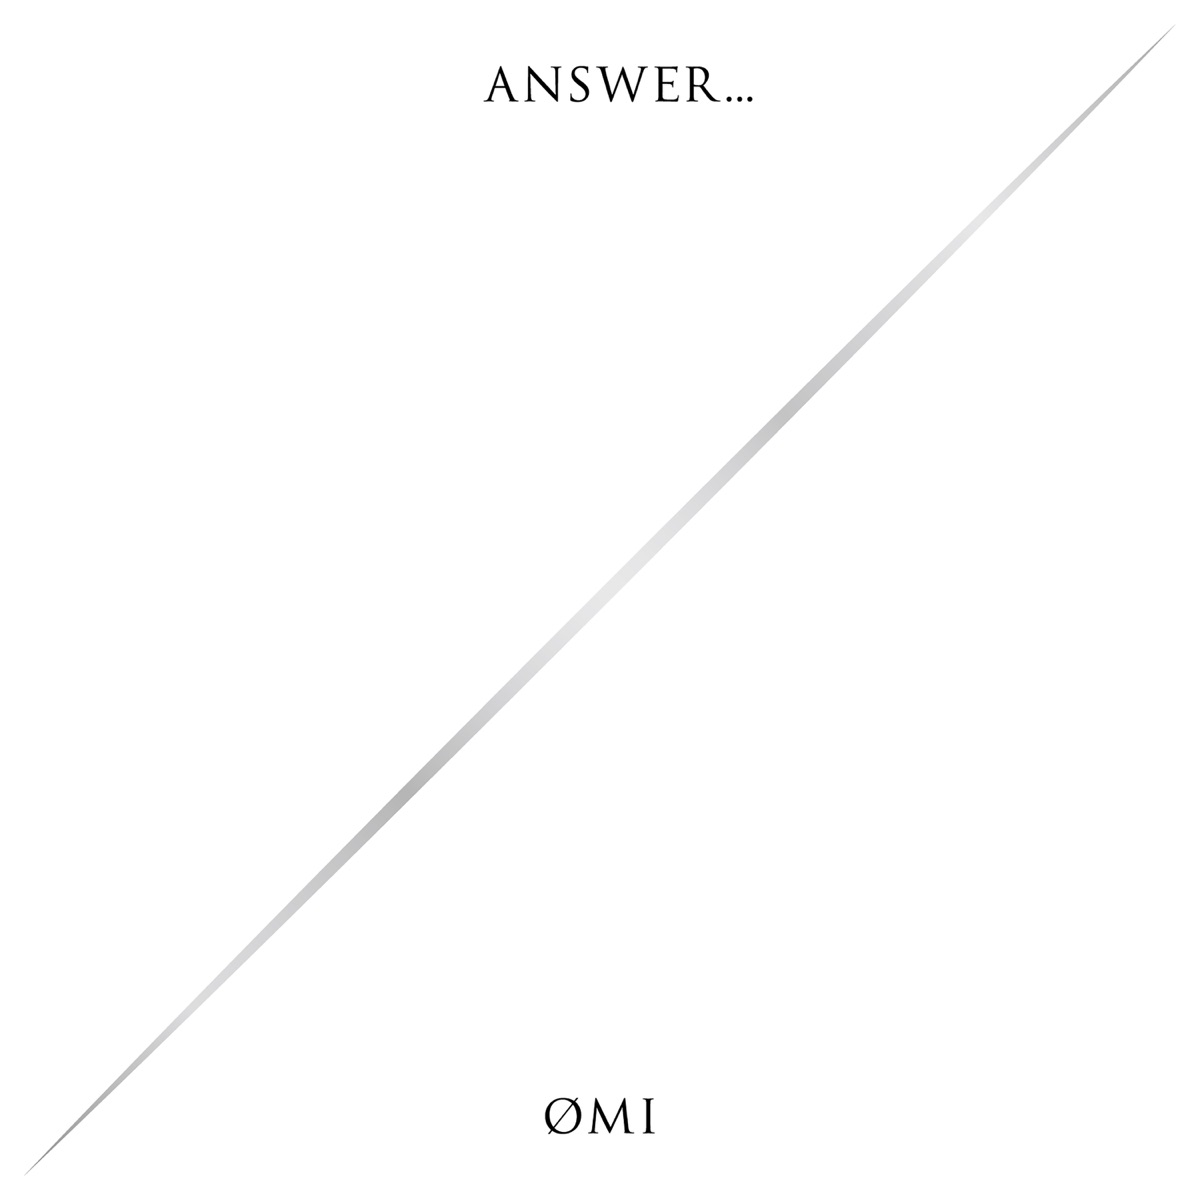 Cover art for『ØMI - Love Letter』from the release『ANSWER...